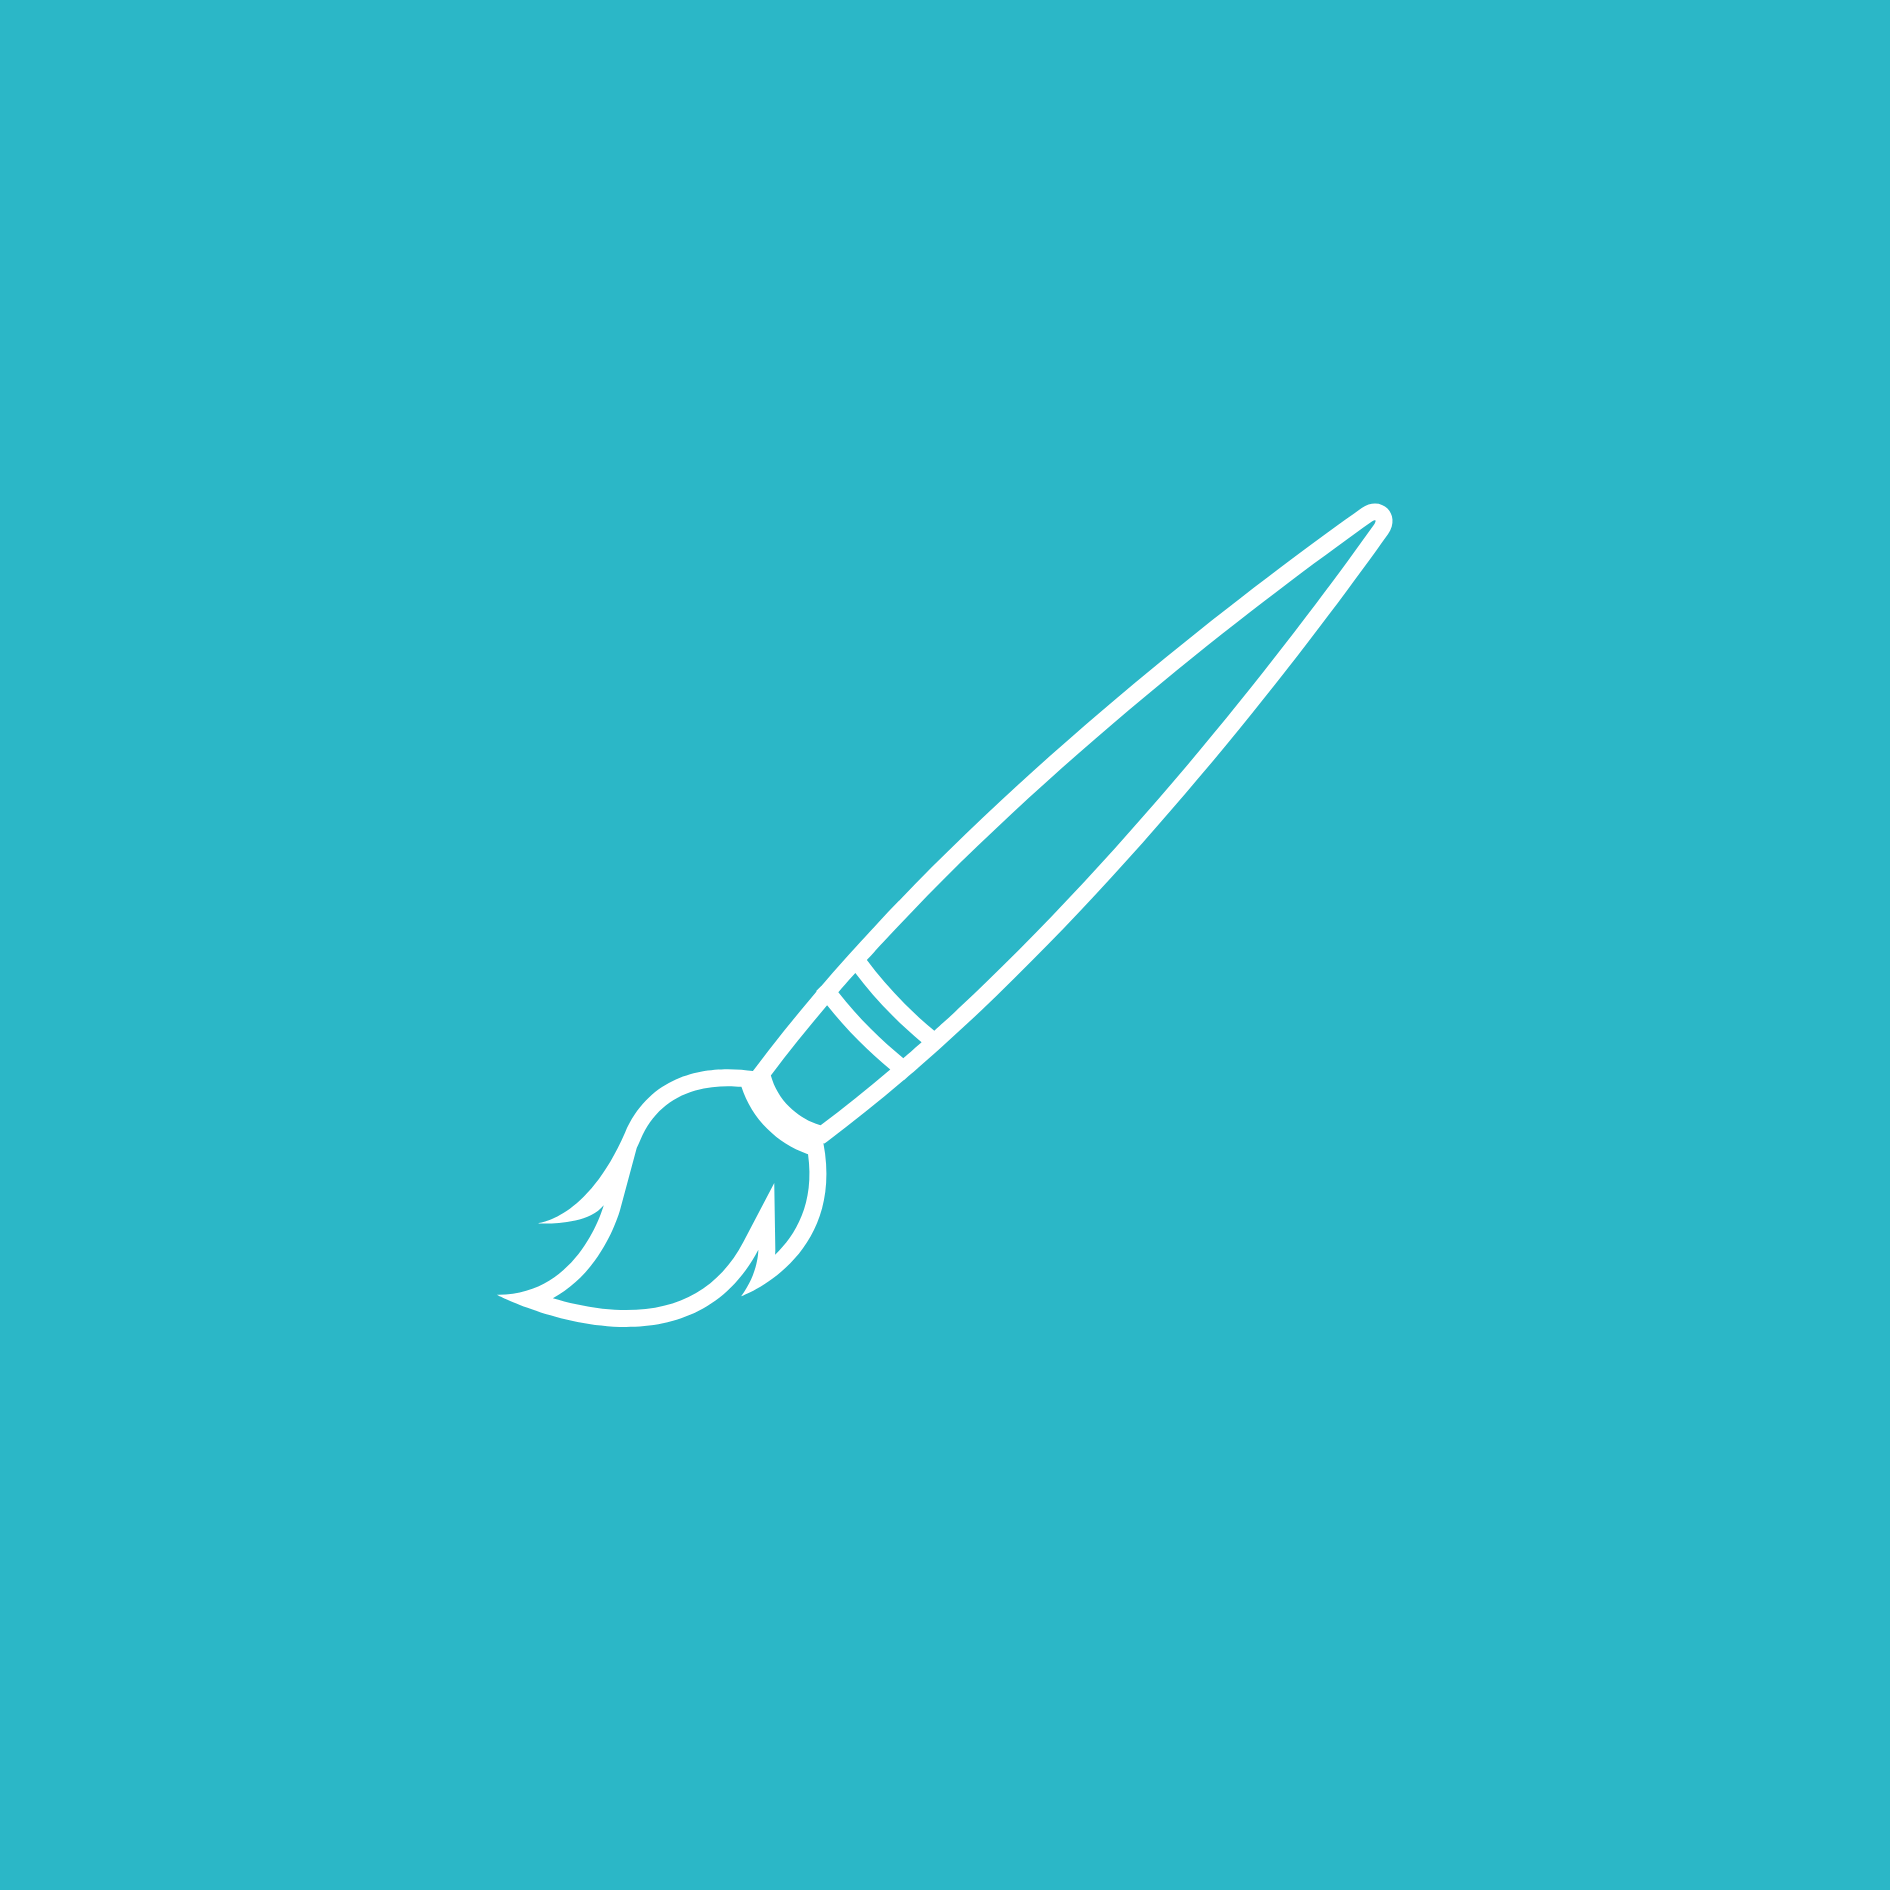 A white line drawing of a paint brush on a blue background.